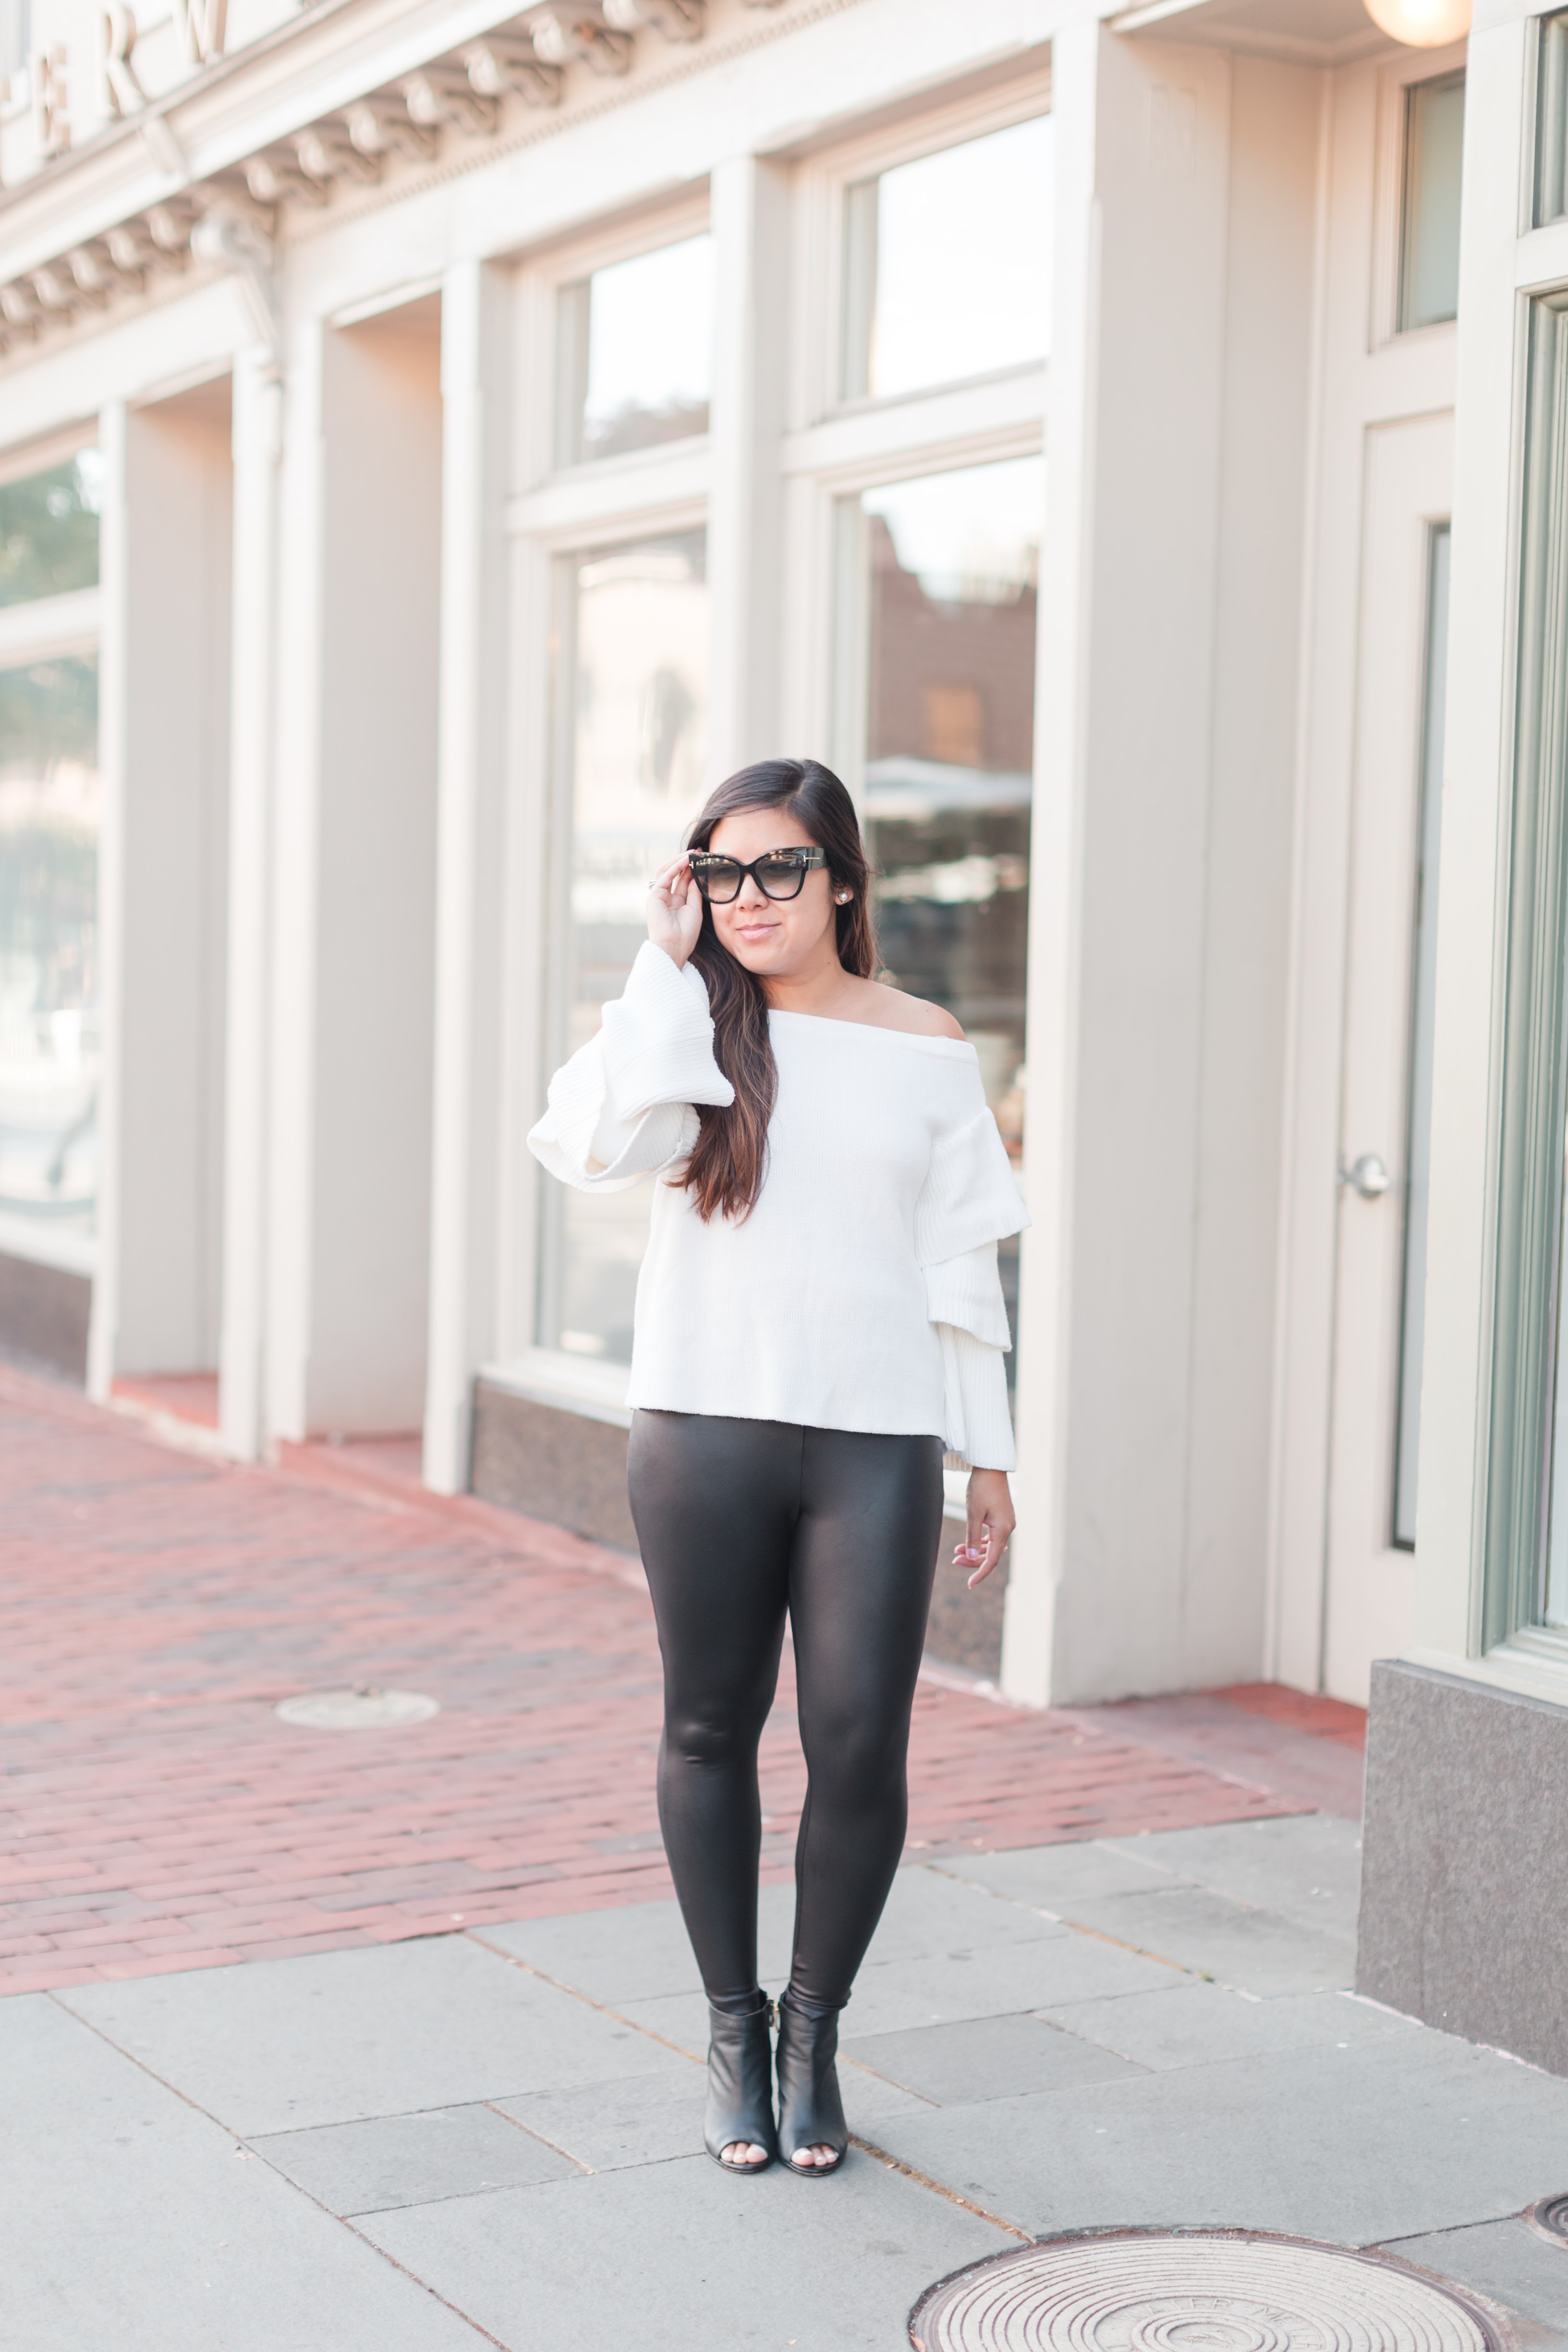 Off The Shoulder Sweater - Stylista Esquire - @stylistaesquire